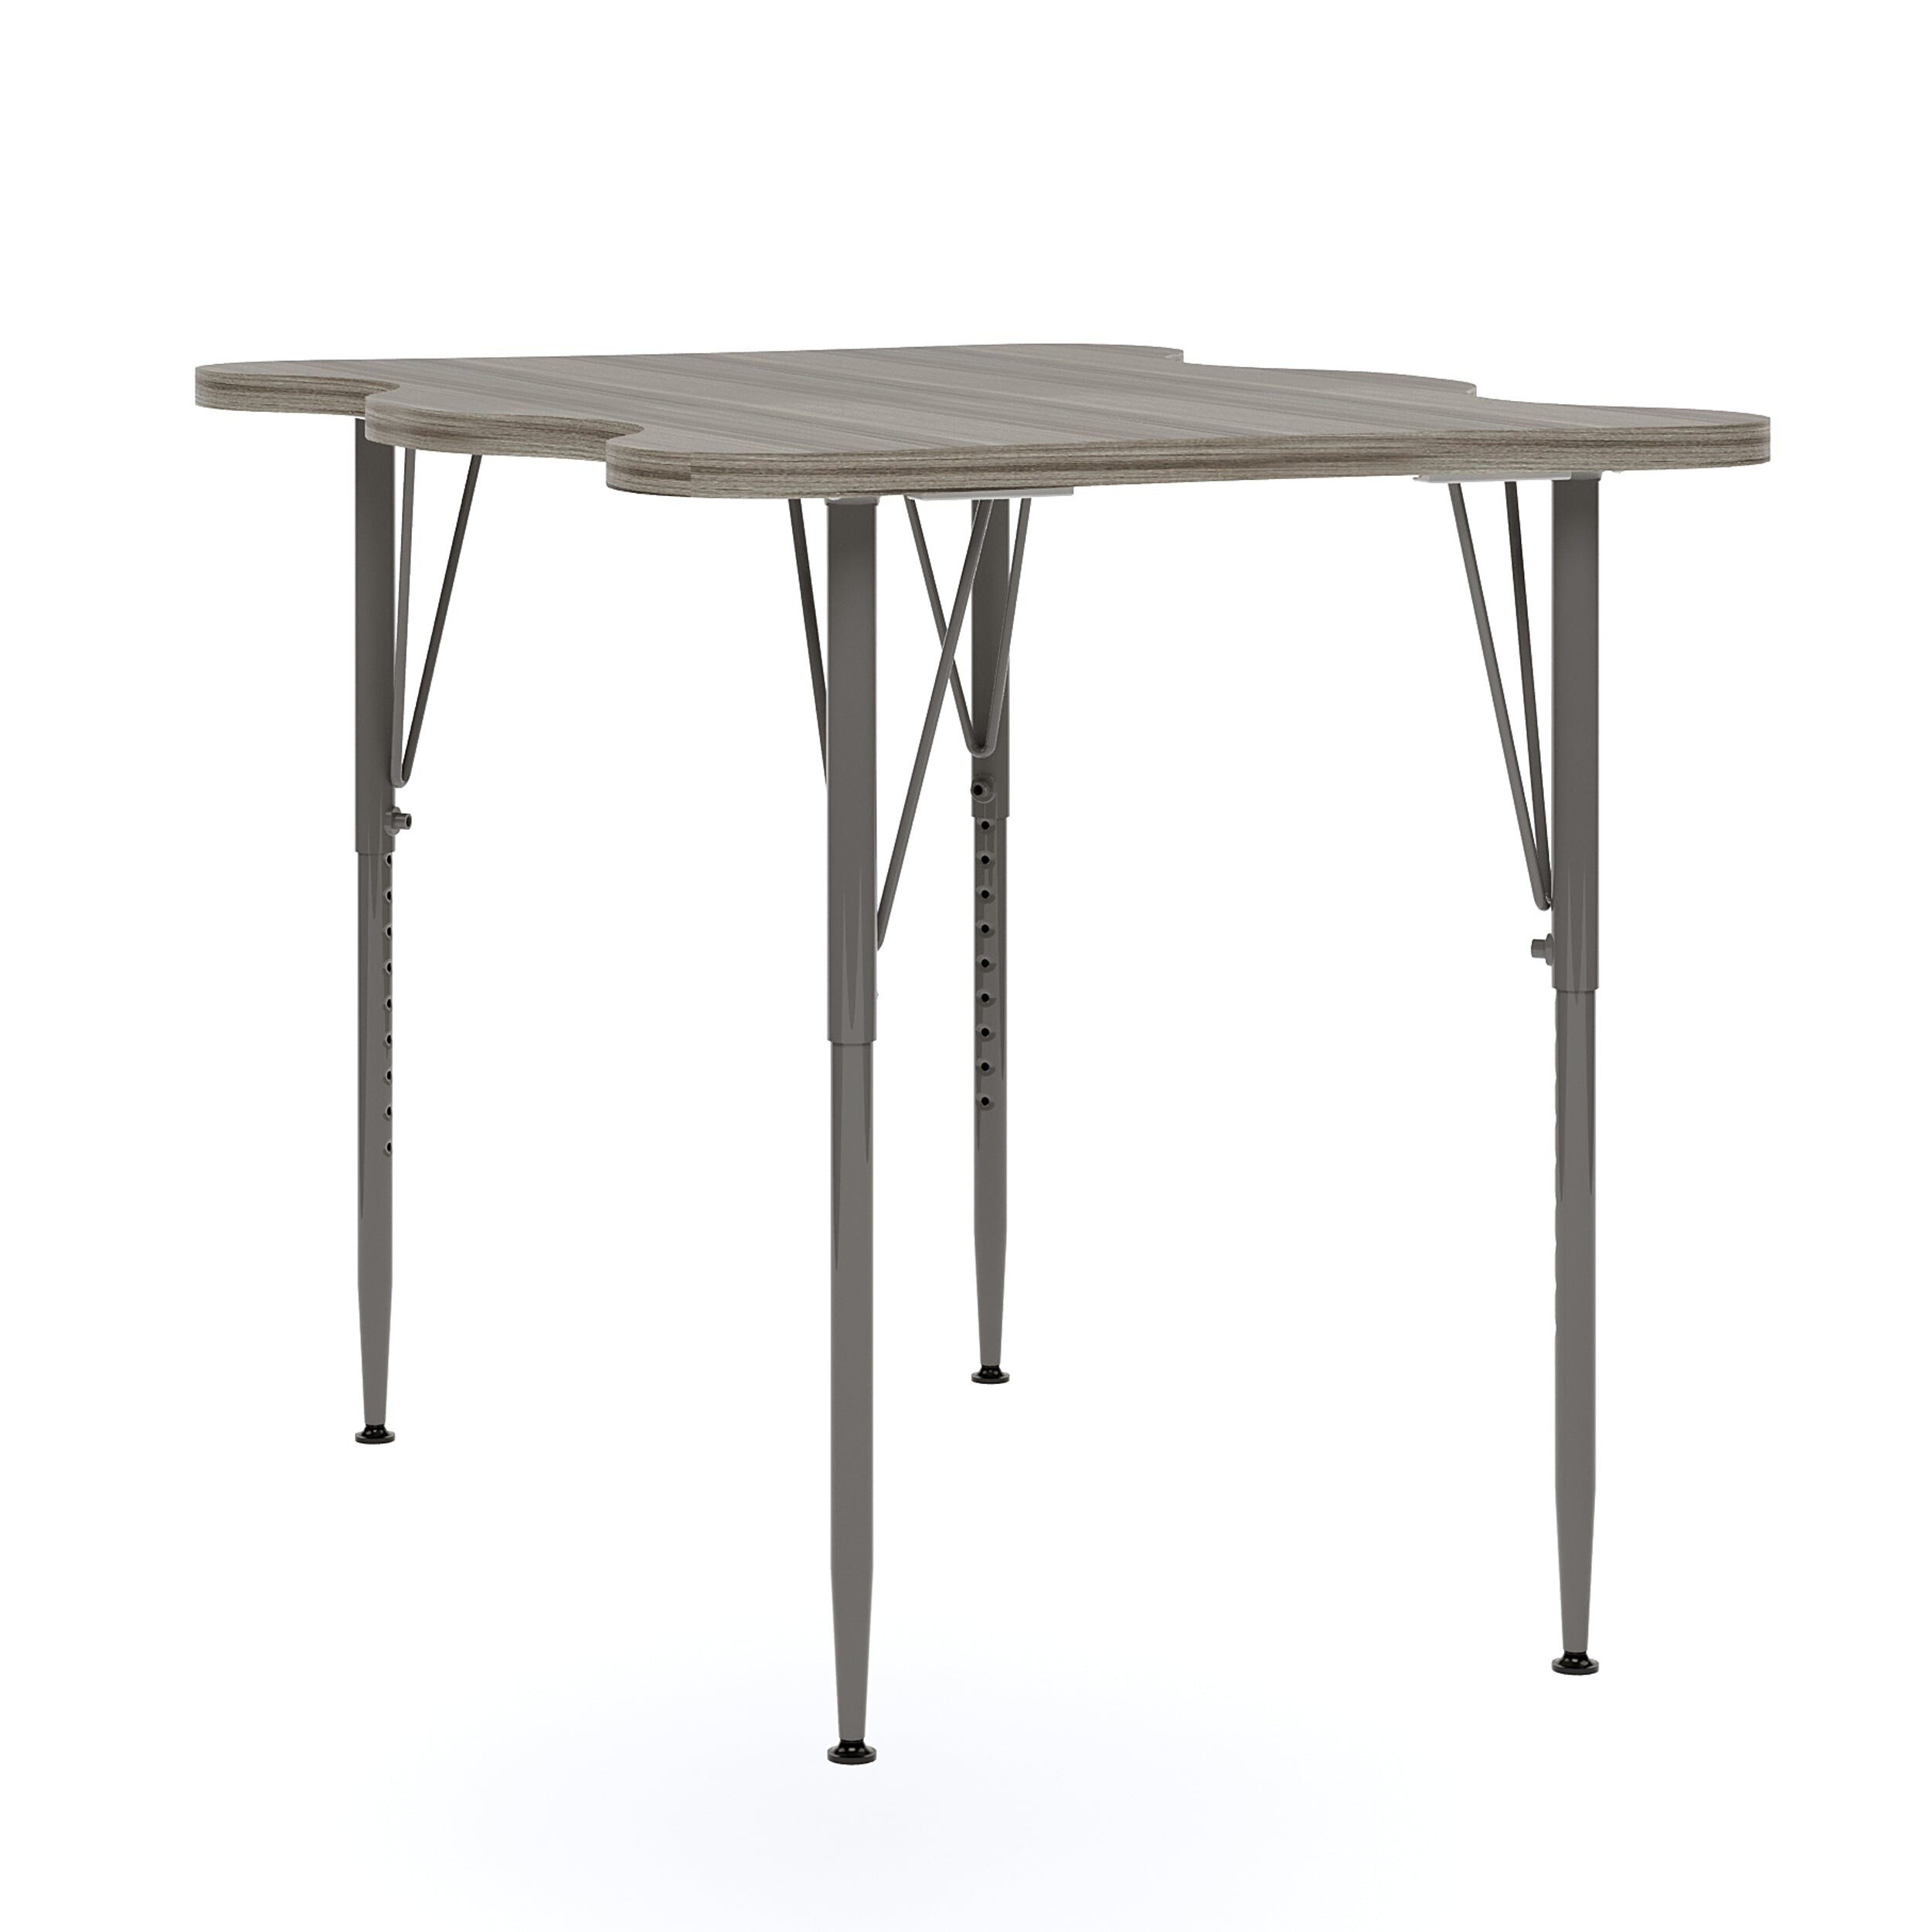 Tot Mate My Place Rectangular Table, Adjustable Height Legs, Table Top Height Range 21" to 30", Ready-To-Assemble